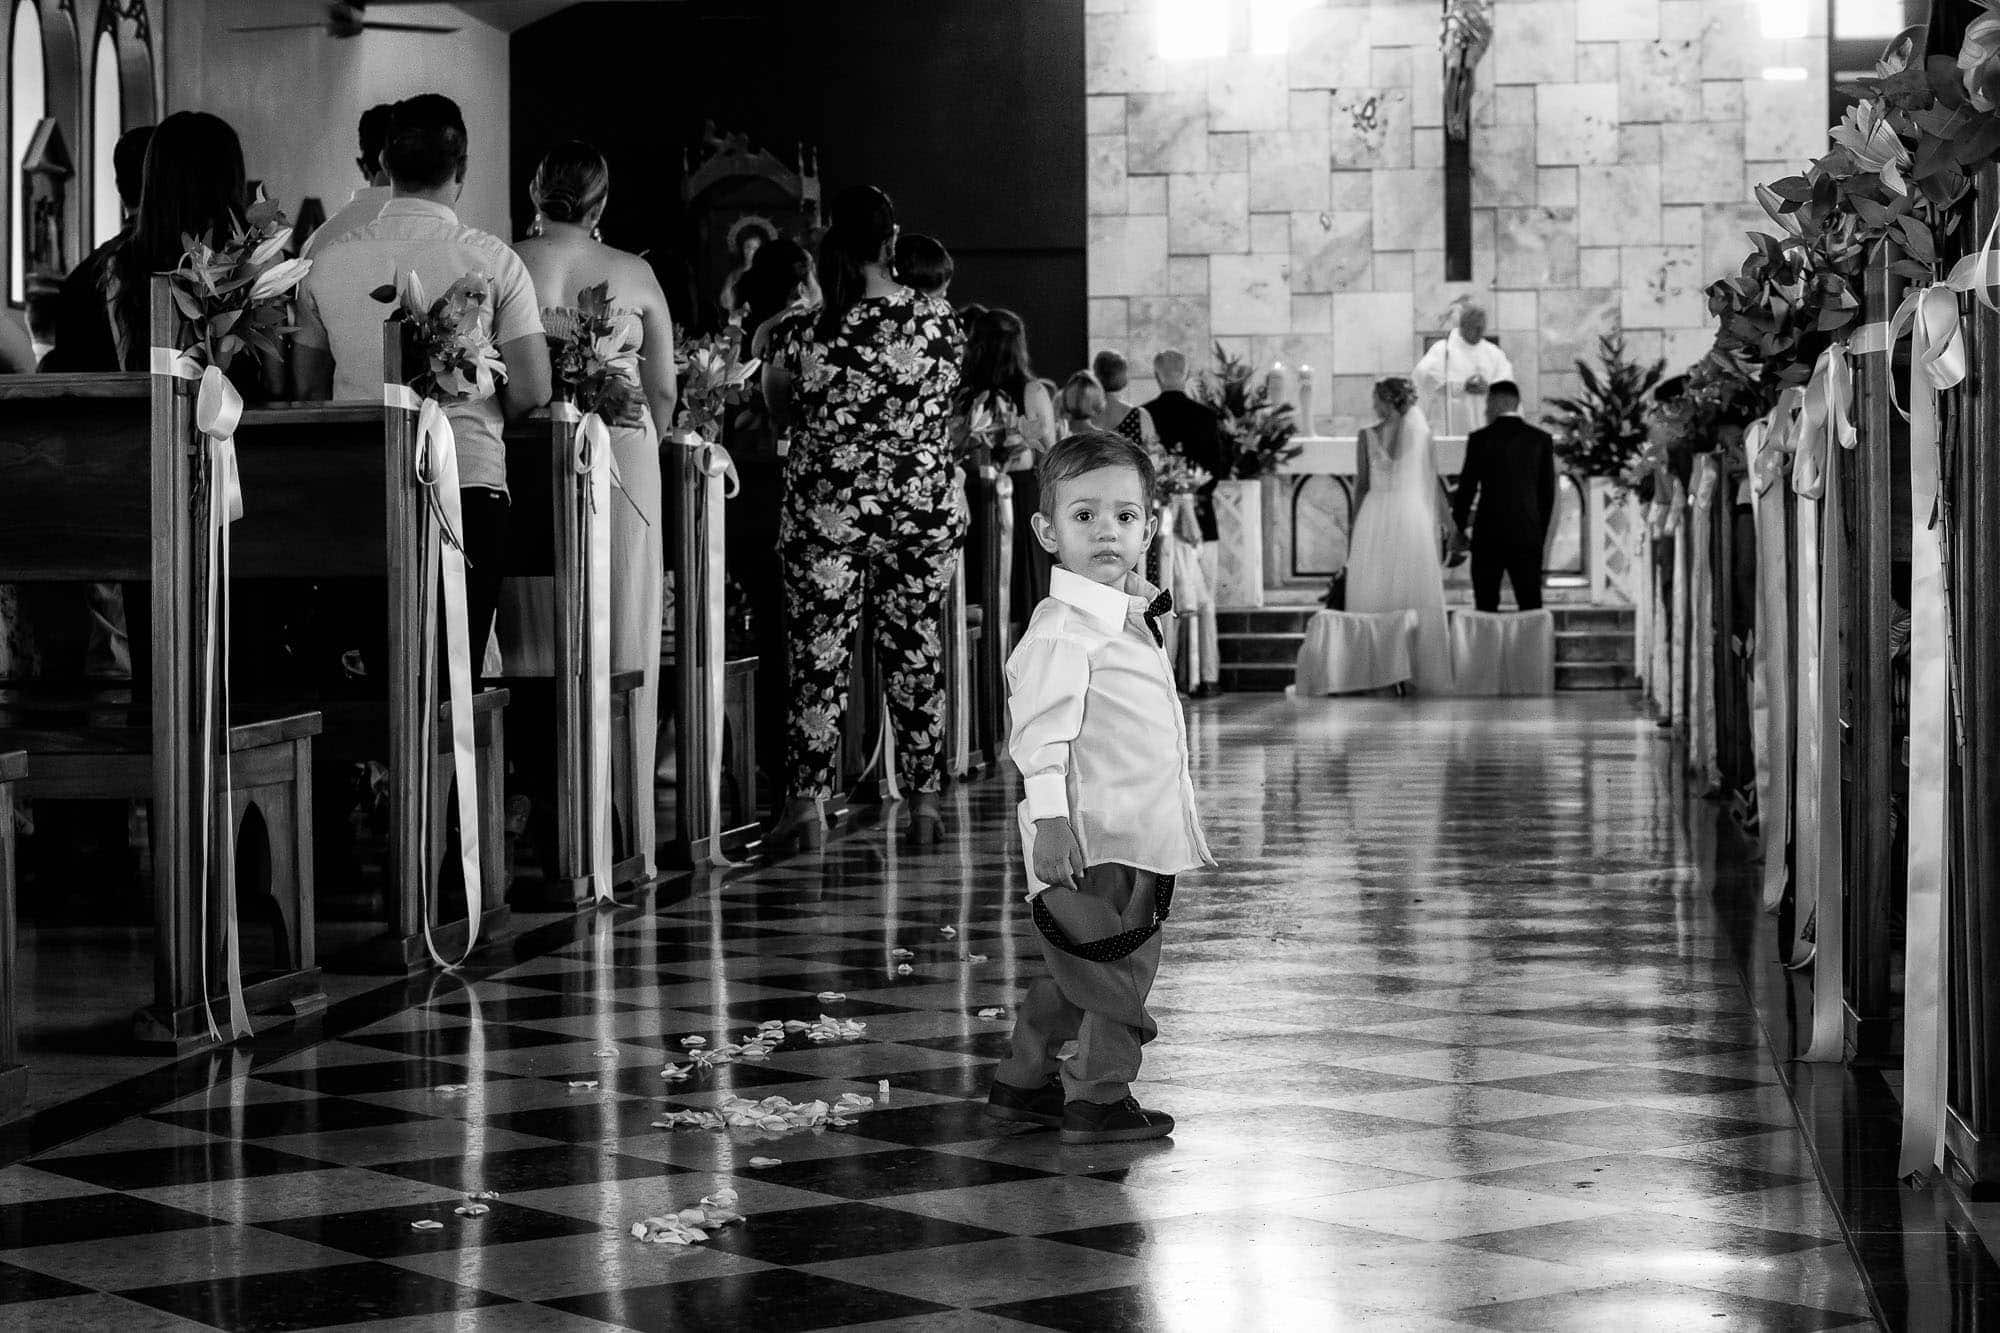 A little boy stands in the aisle behind the bride and groom